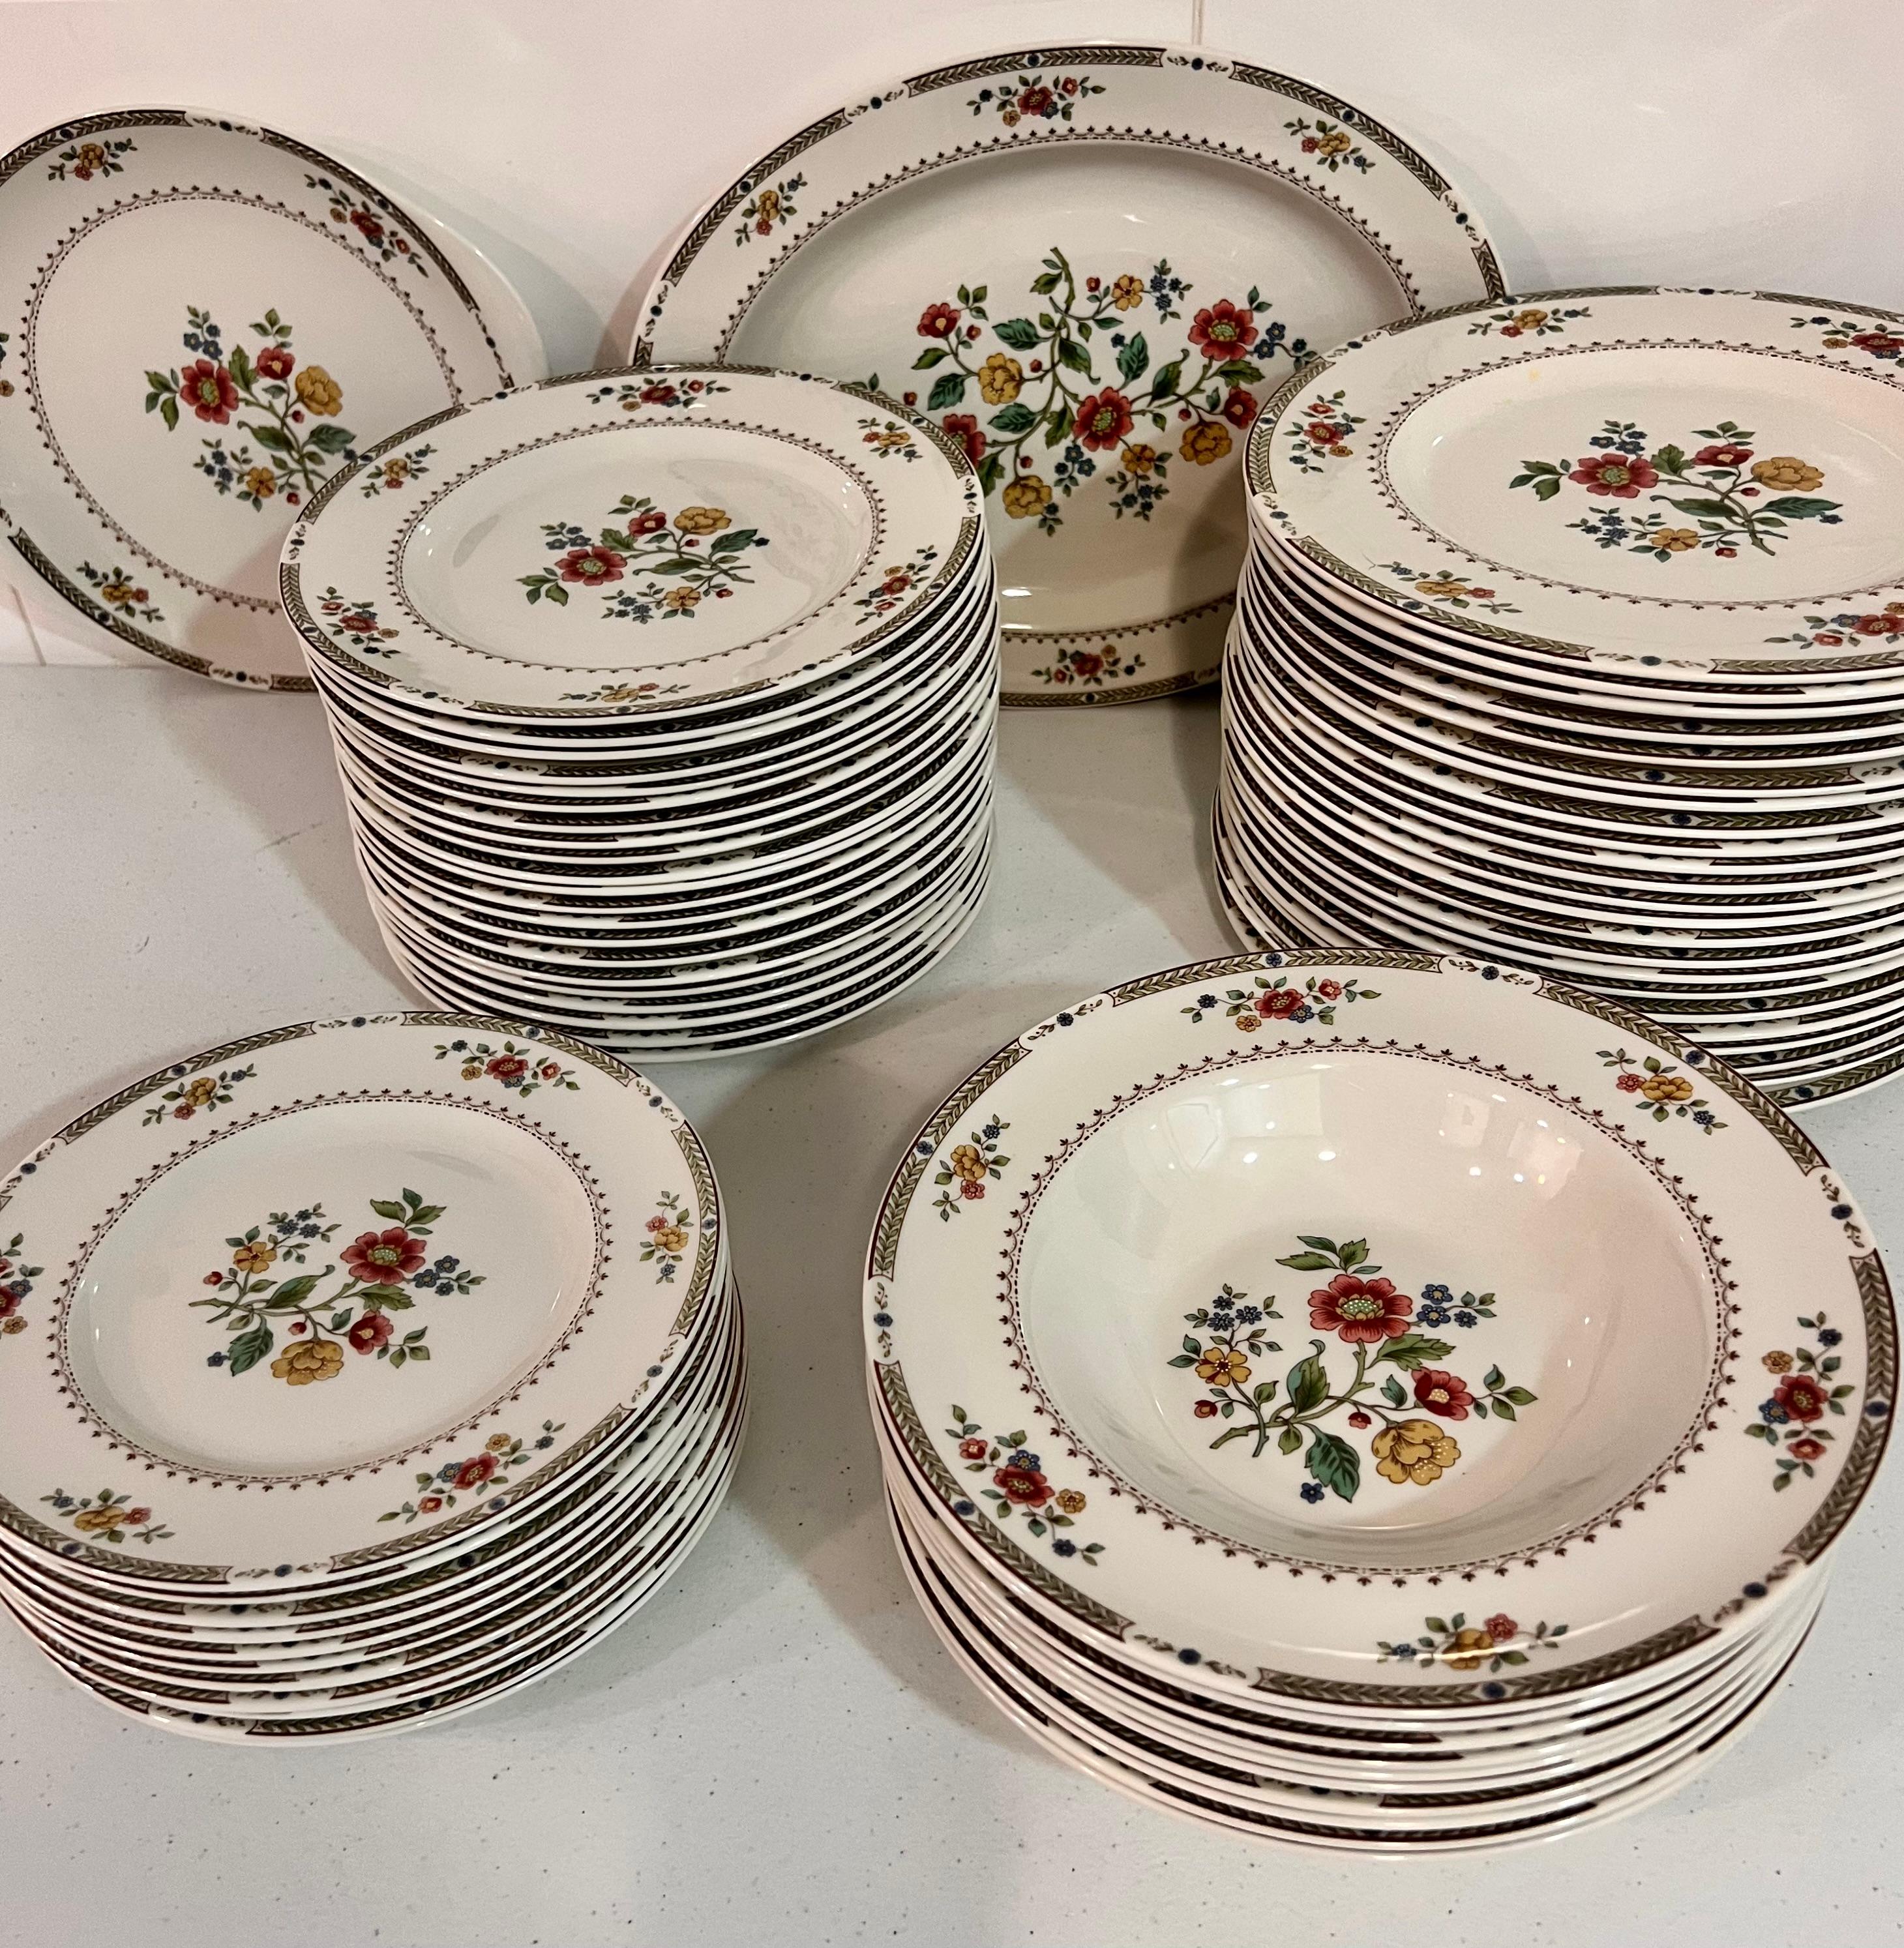 Footed cream soup bowl & saucer set replacement flatware and dinnerware royal doulton kingswood floral design

Hand wash

Request info for flatware and diner ware 
we sell them individually or in sets
We have a full collection that originally